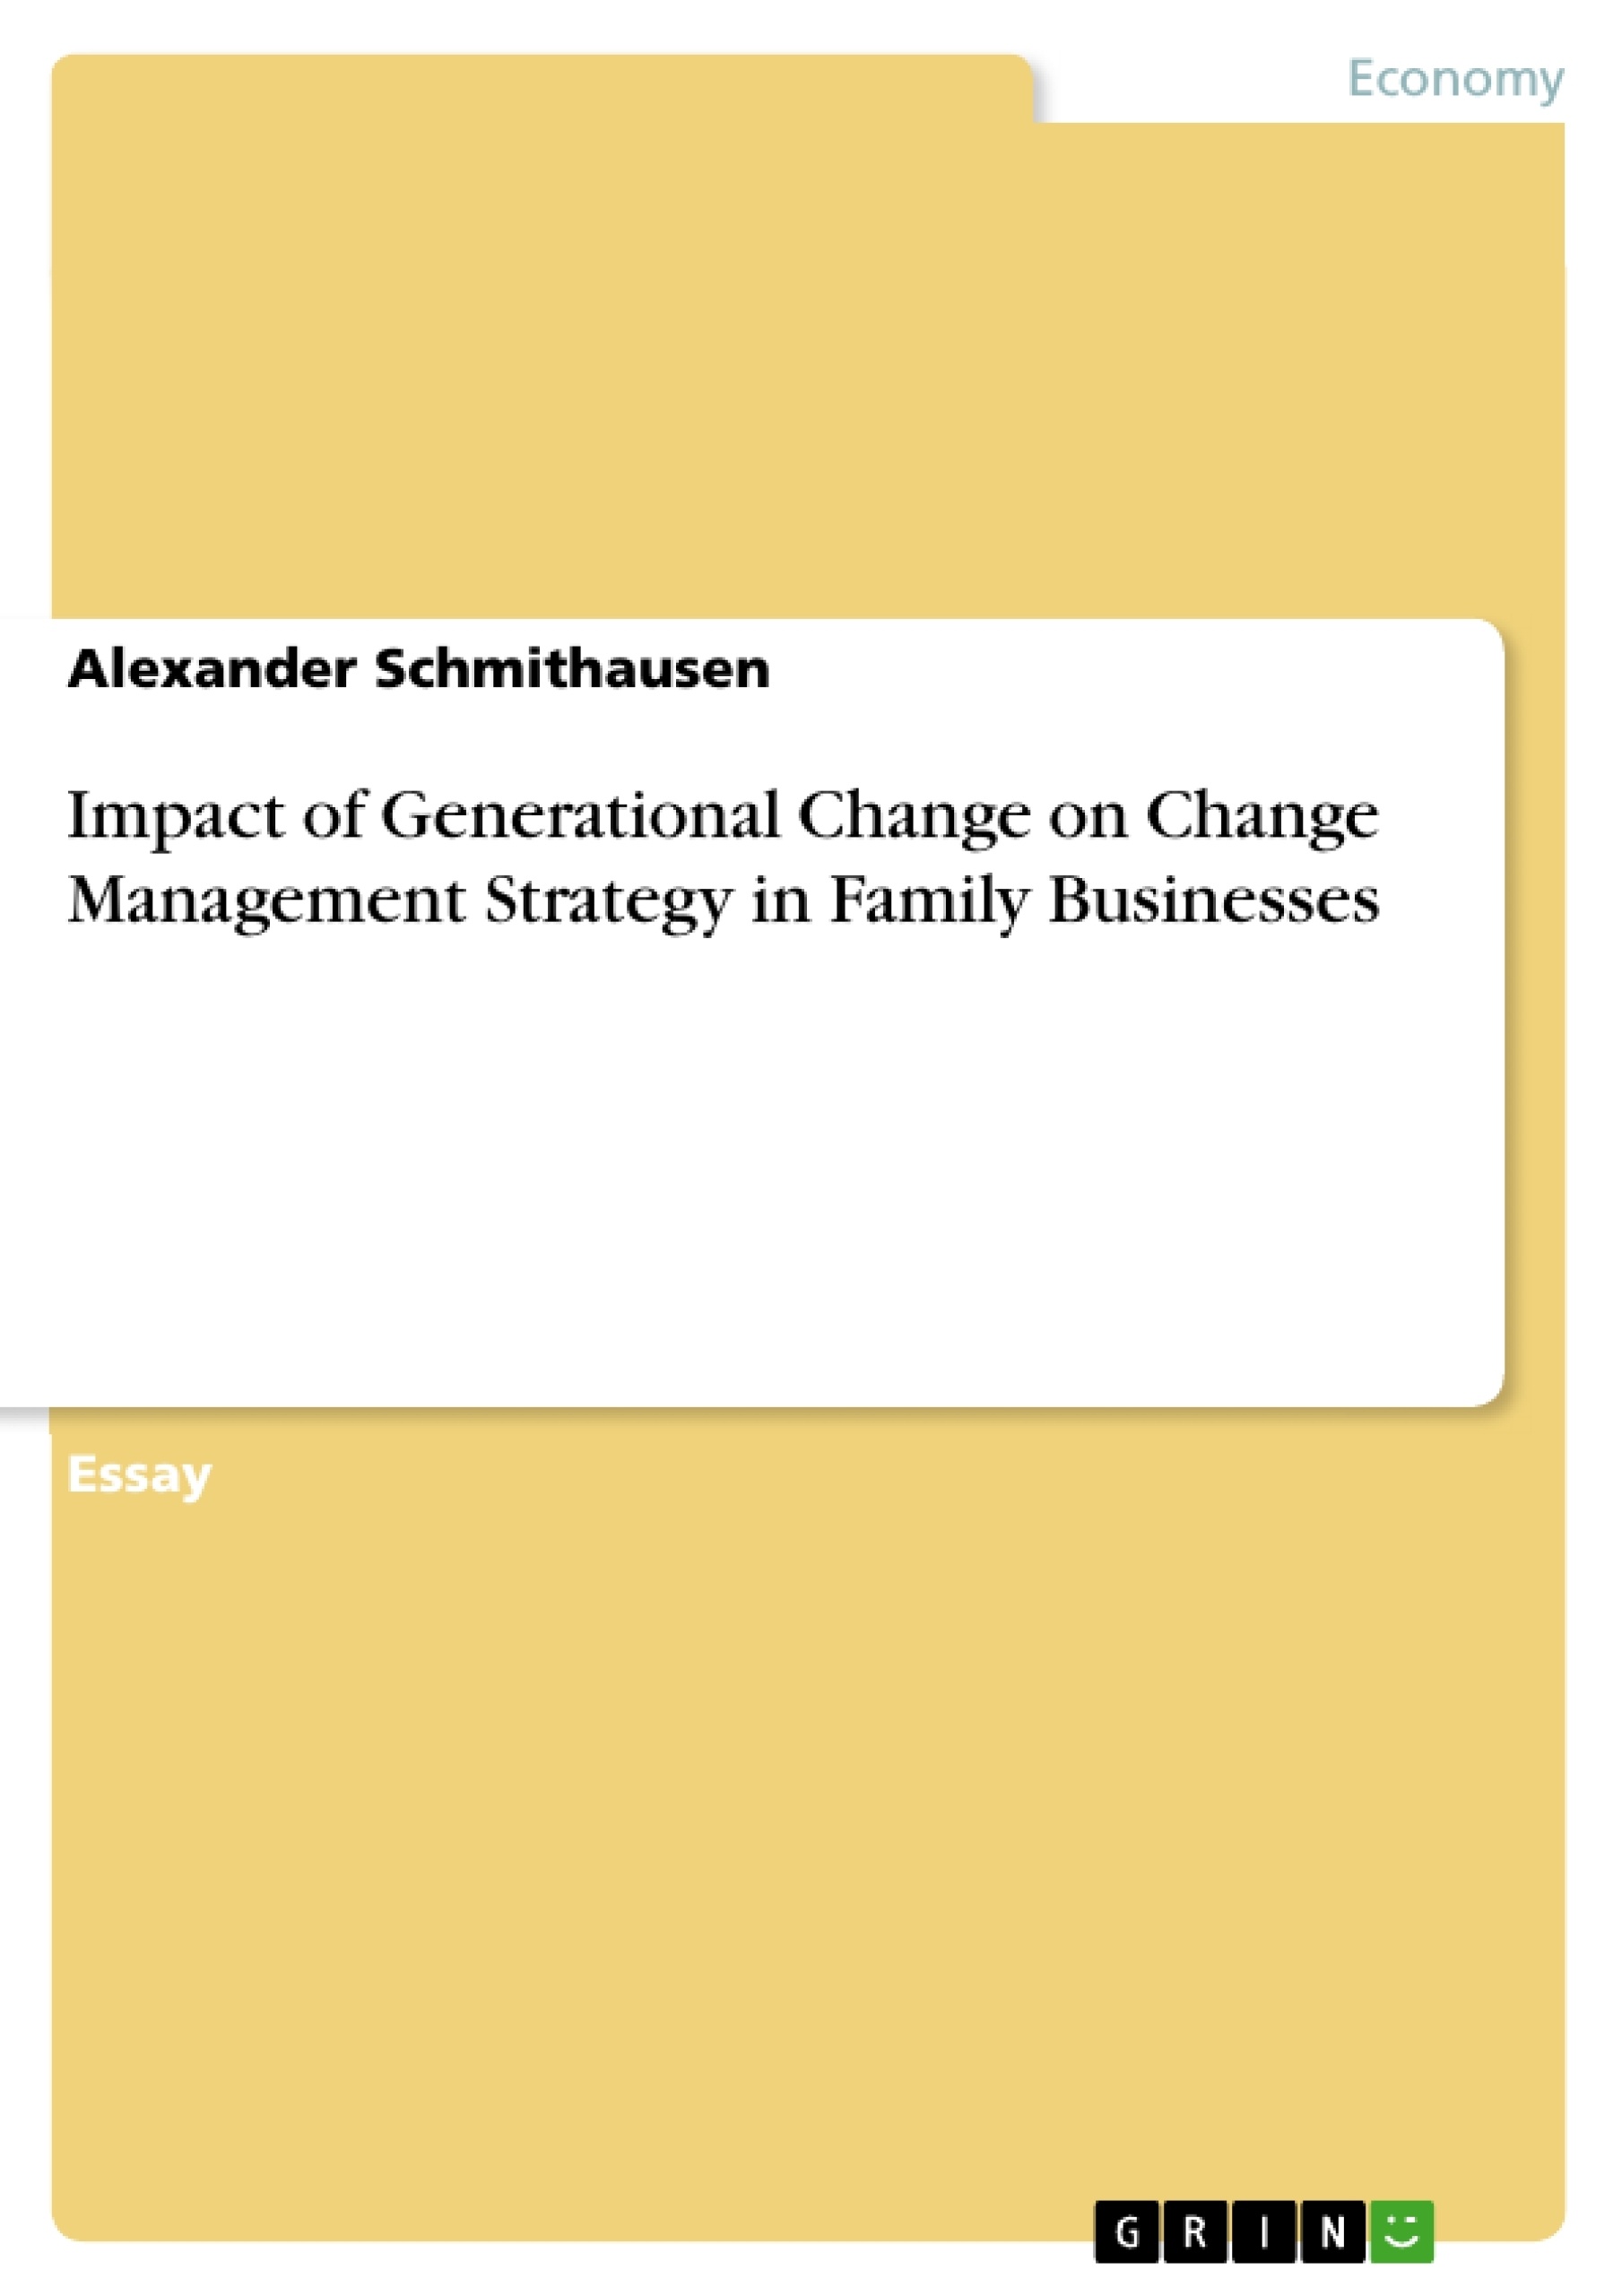 Title: Impact of Generational Change on Change Management Strategy in Family Businesses